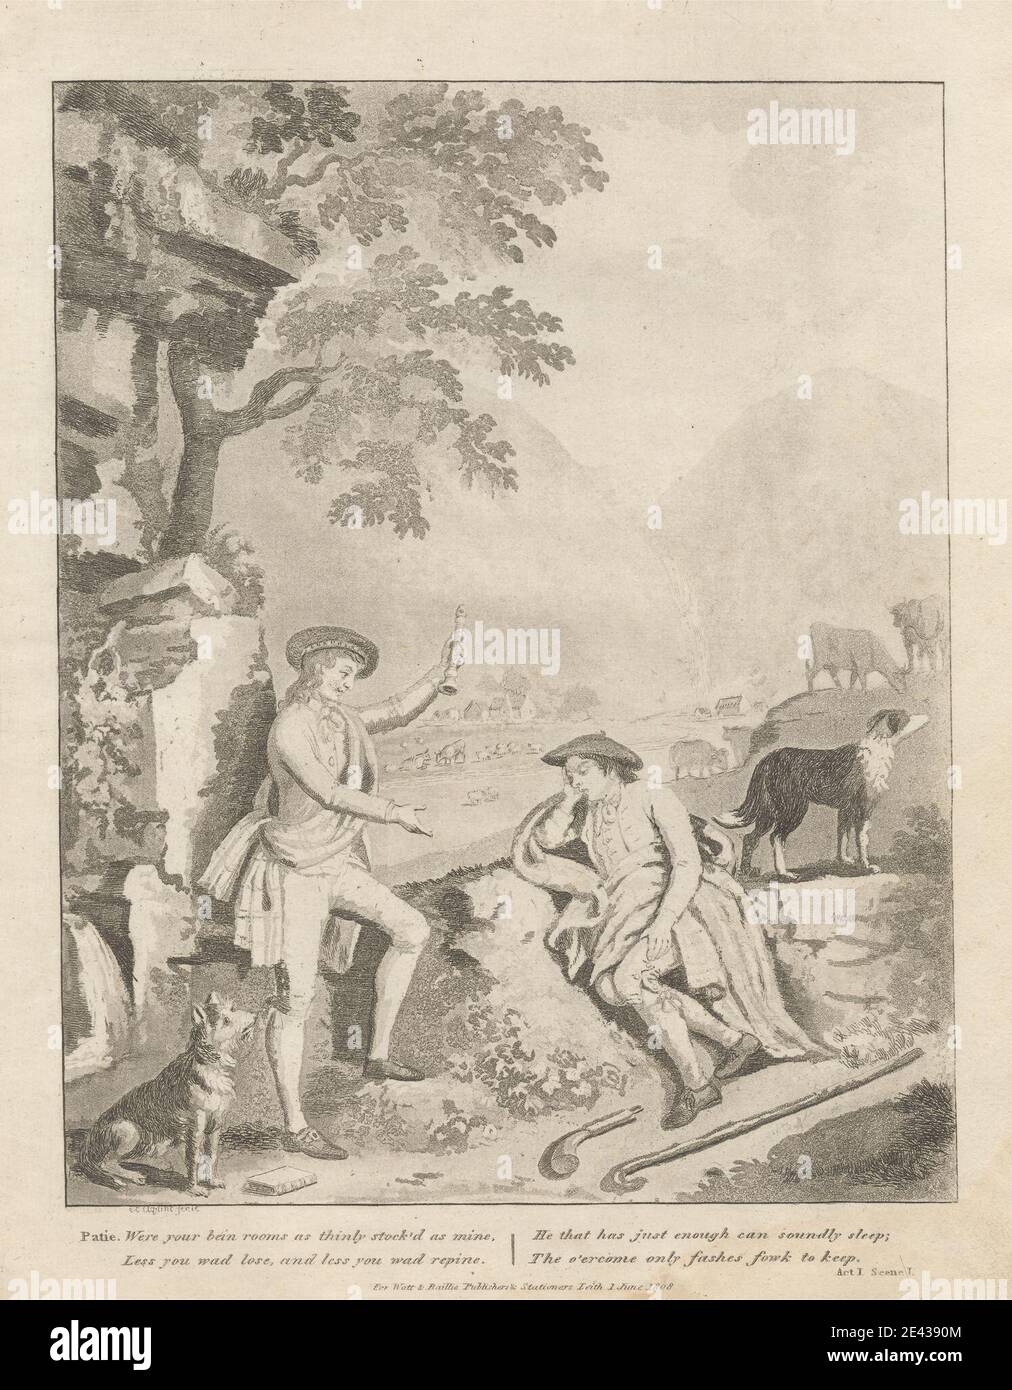 Print made by David Allan, 1744â€“1796, British, born in Scotland, Patie Rebukes Roger, 1808. Etching and aquatint on moderately thick, moderately textured, cream wove paper.   canes , cattle , comedy , costume , dogs (animals) , genre subject , gesture , hills , houses , illustration , jackets , men , pastoral , peasants , plaid , poem , recorder , resting , river , sash , sheep , shepherds , tams , trees , waterfall. Europe , Scotland , United Kingdom Stock Photo